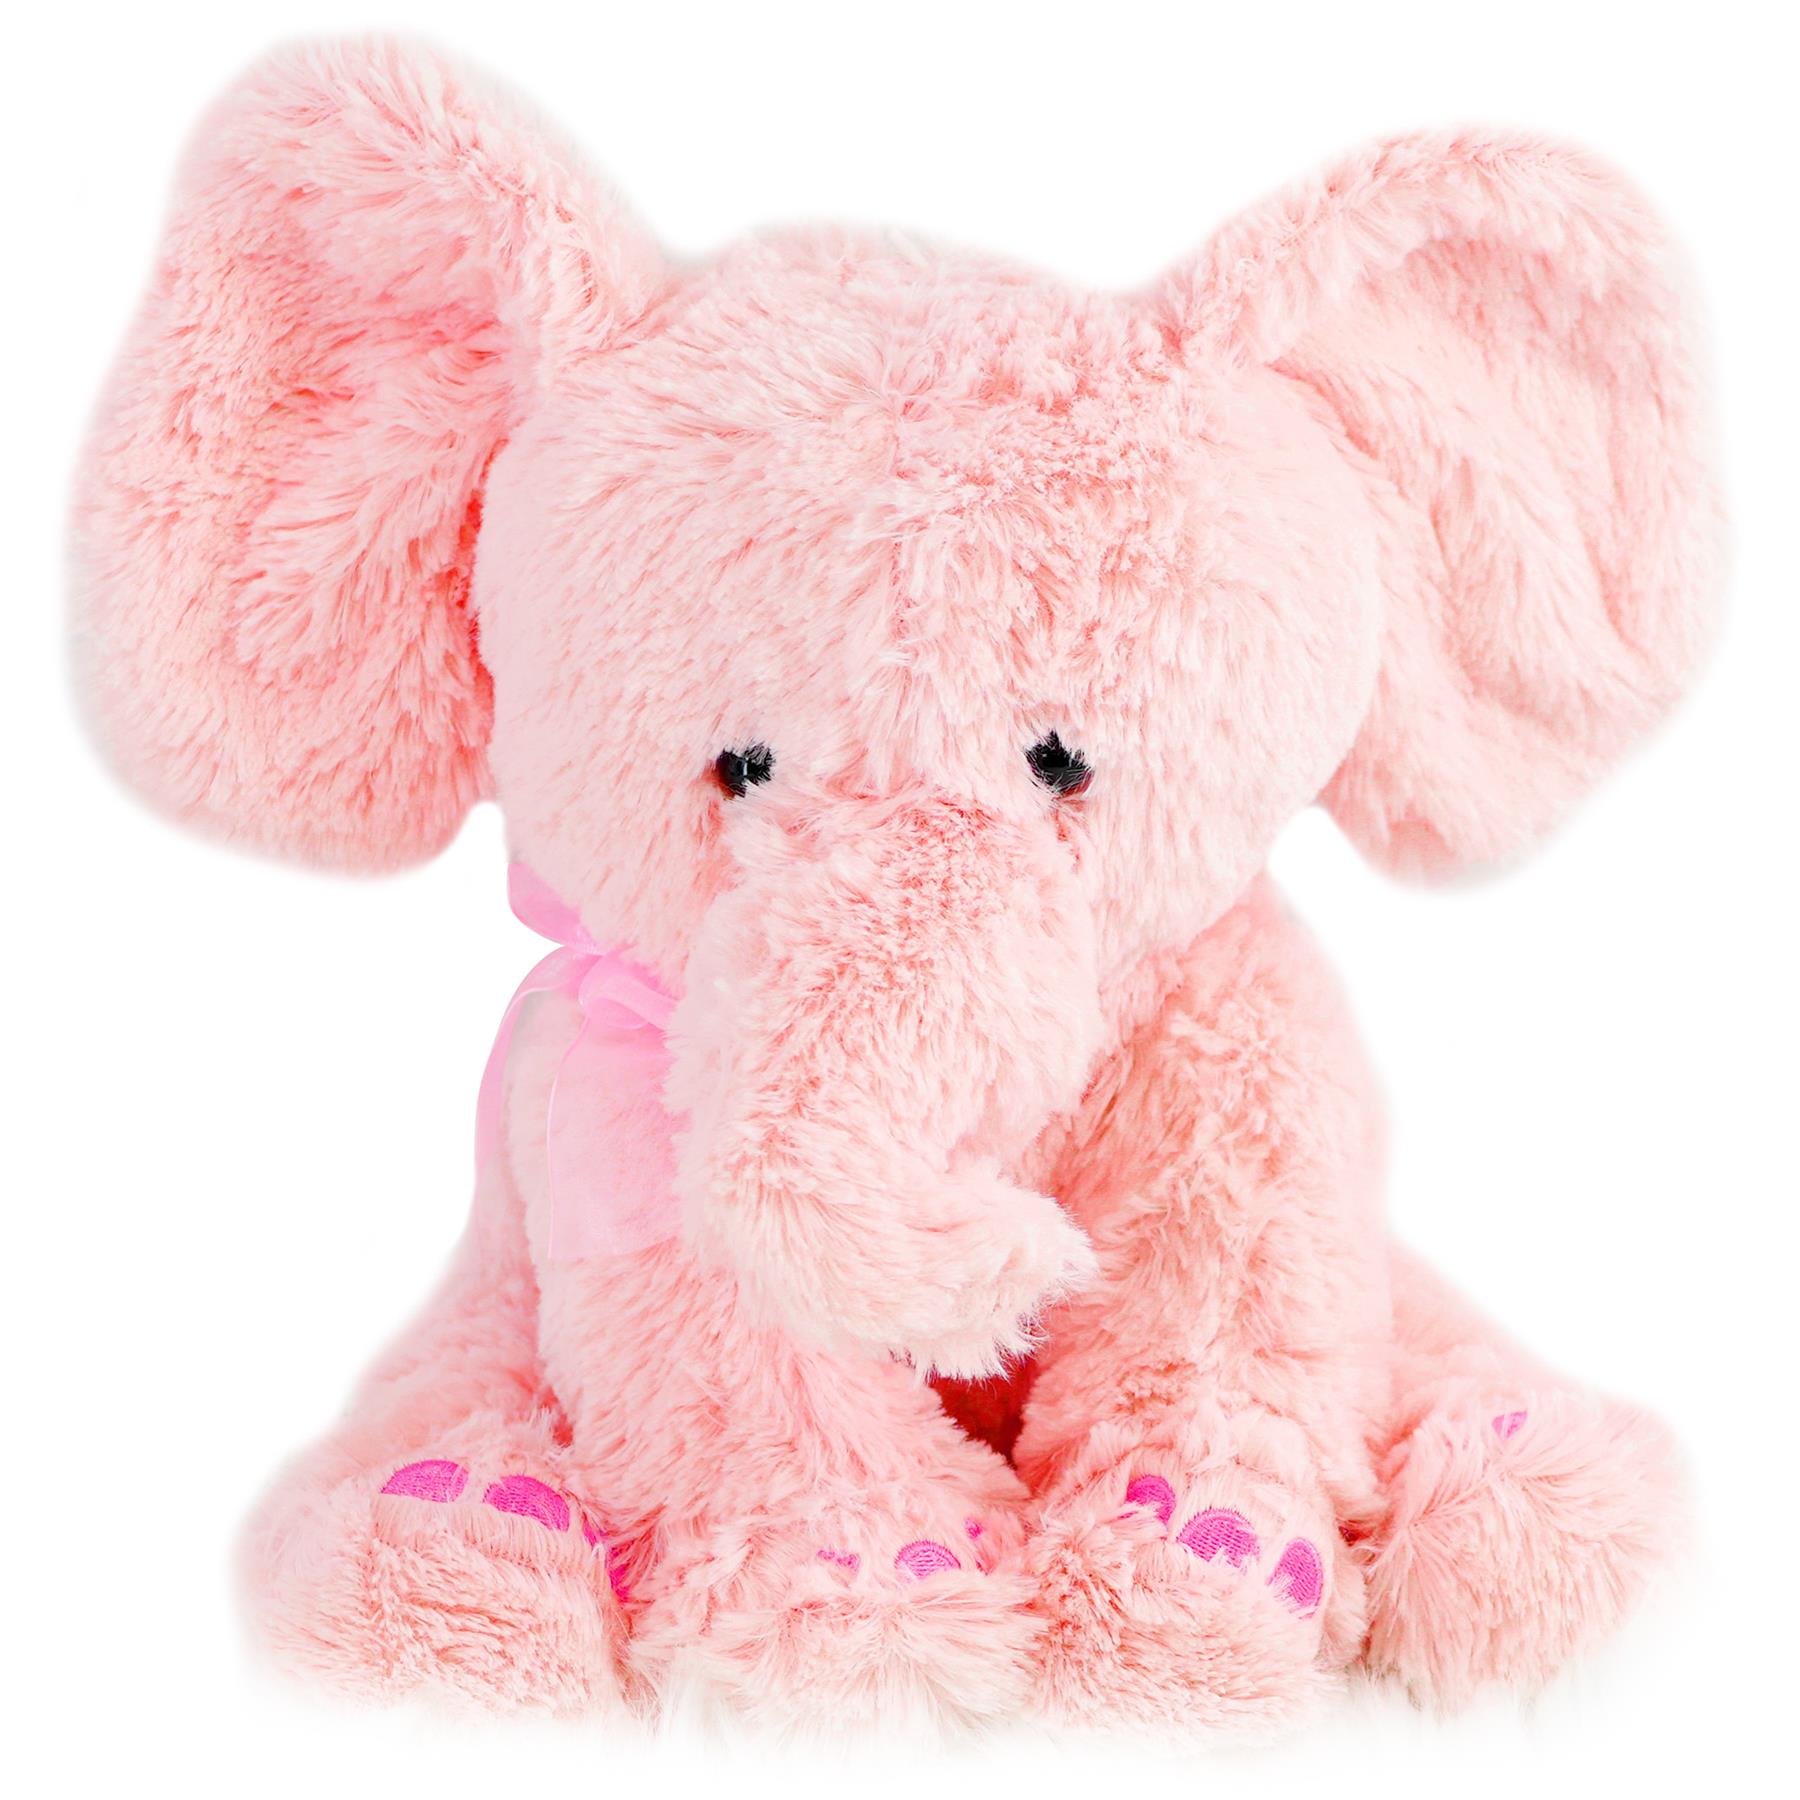 The Magic Toy Shop Toys and Games Pink Plush Elephant Soft Toys